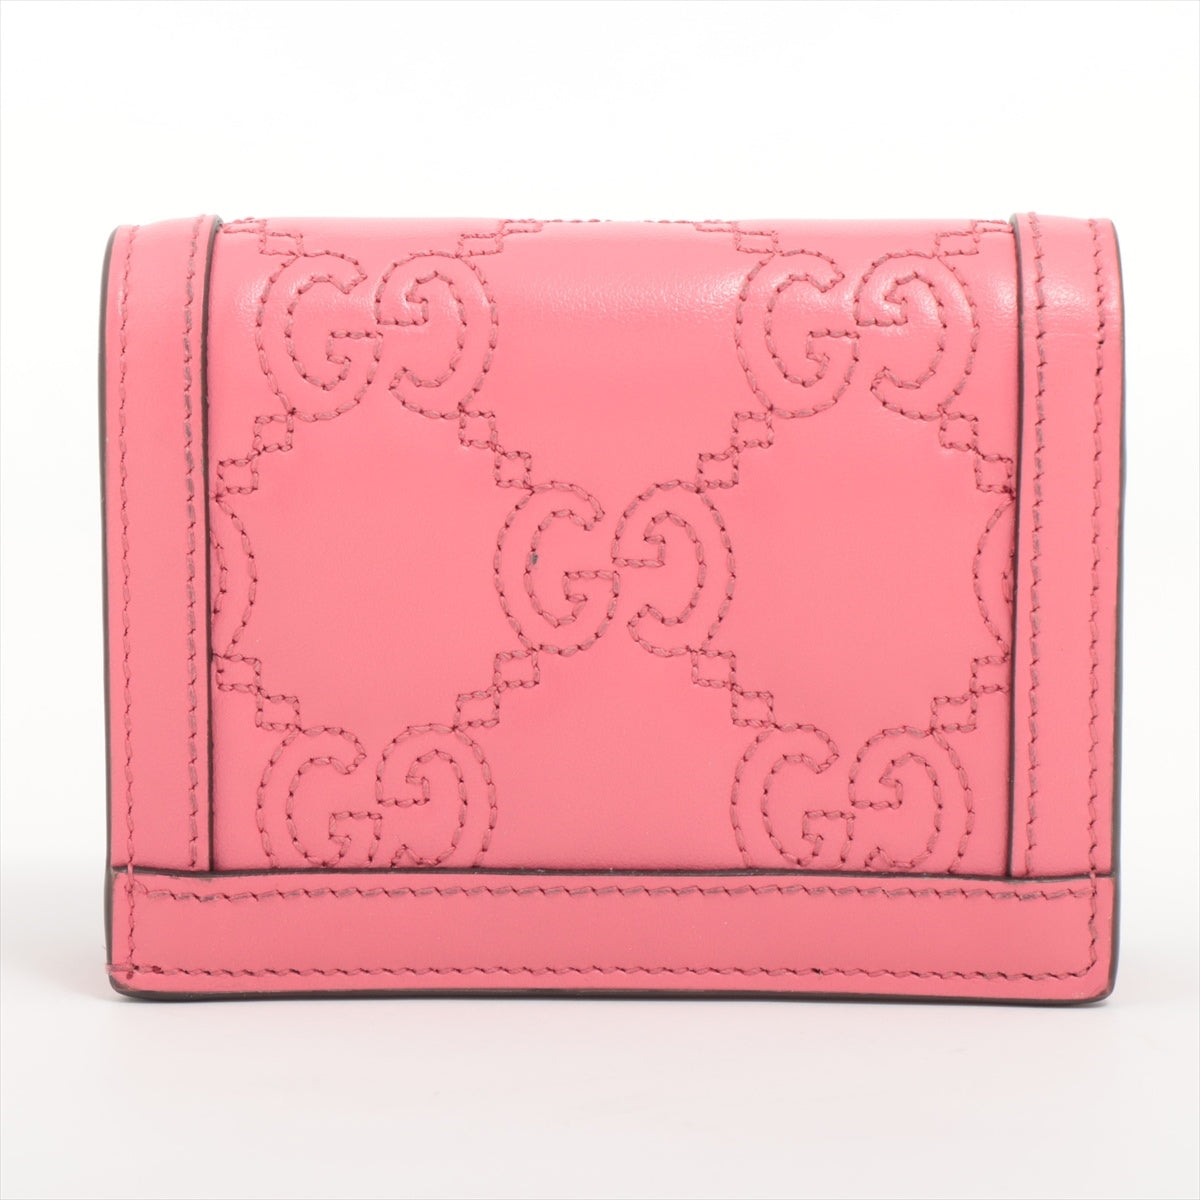 Gucci GG Matrasse 723786 Leather Compact Wallet Pink